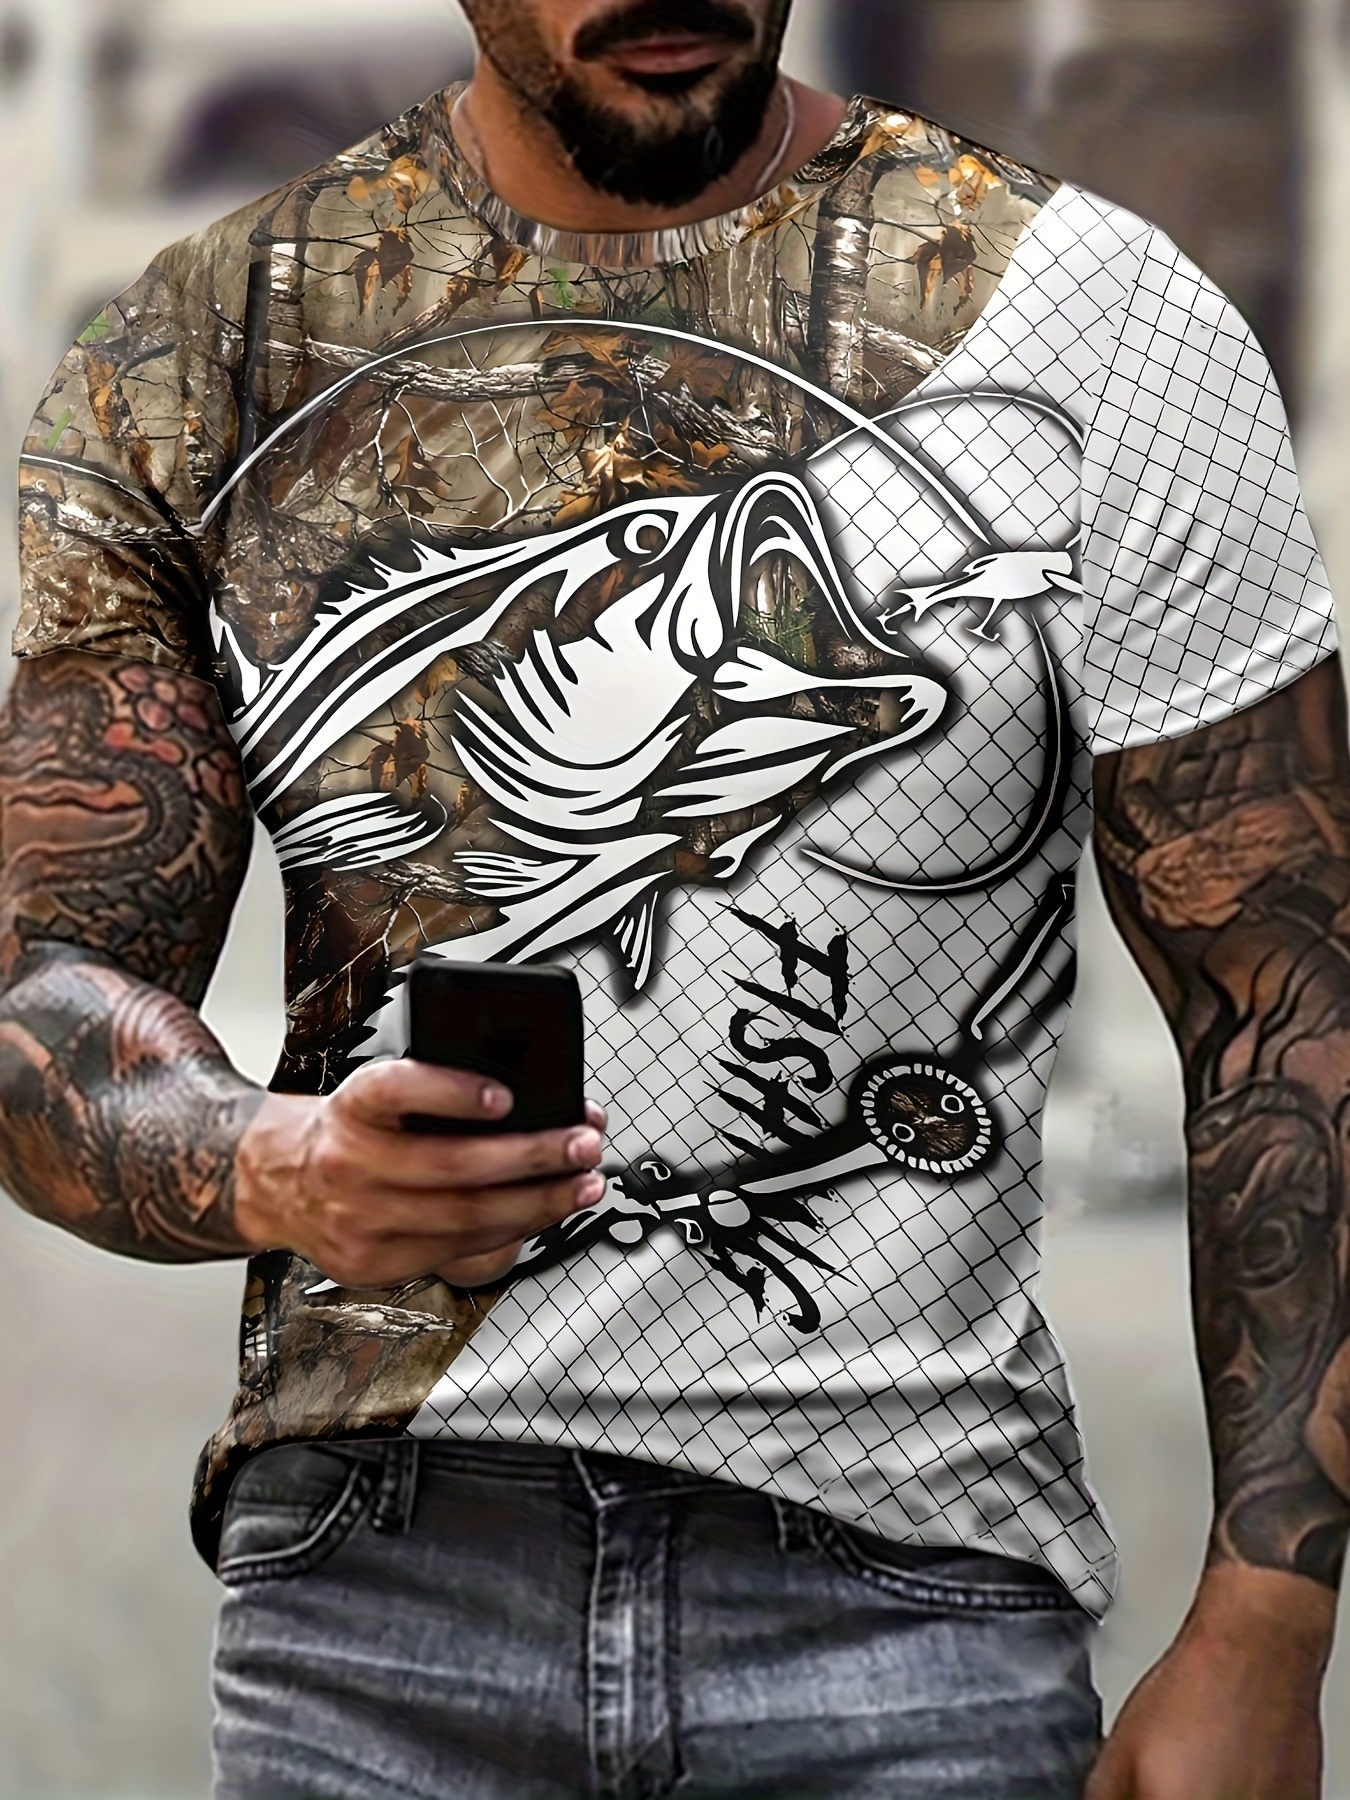 Bass Fishing T Shirt Designs designs, themes, templates and